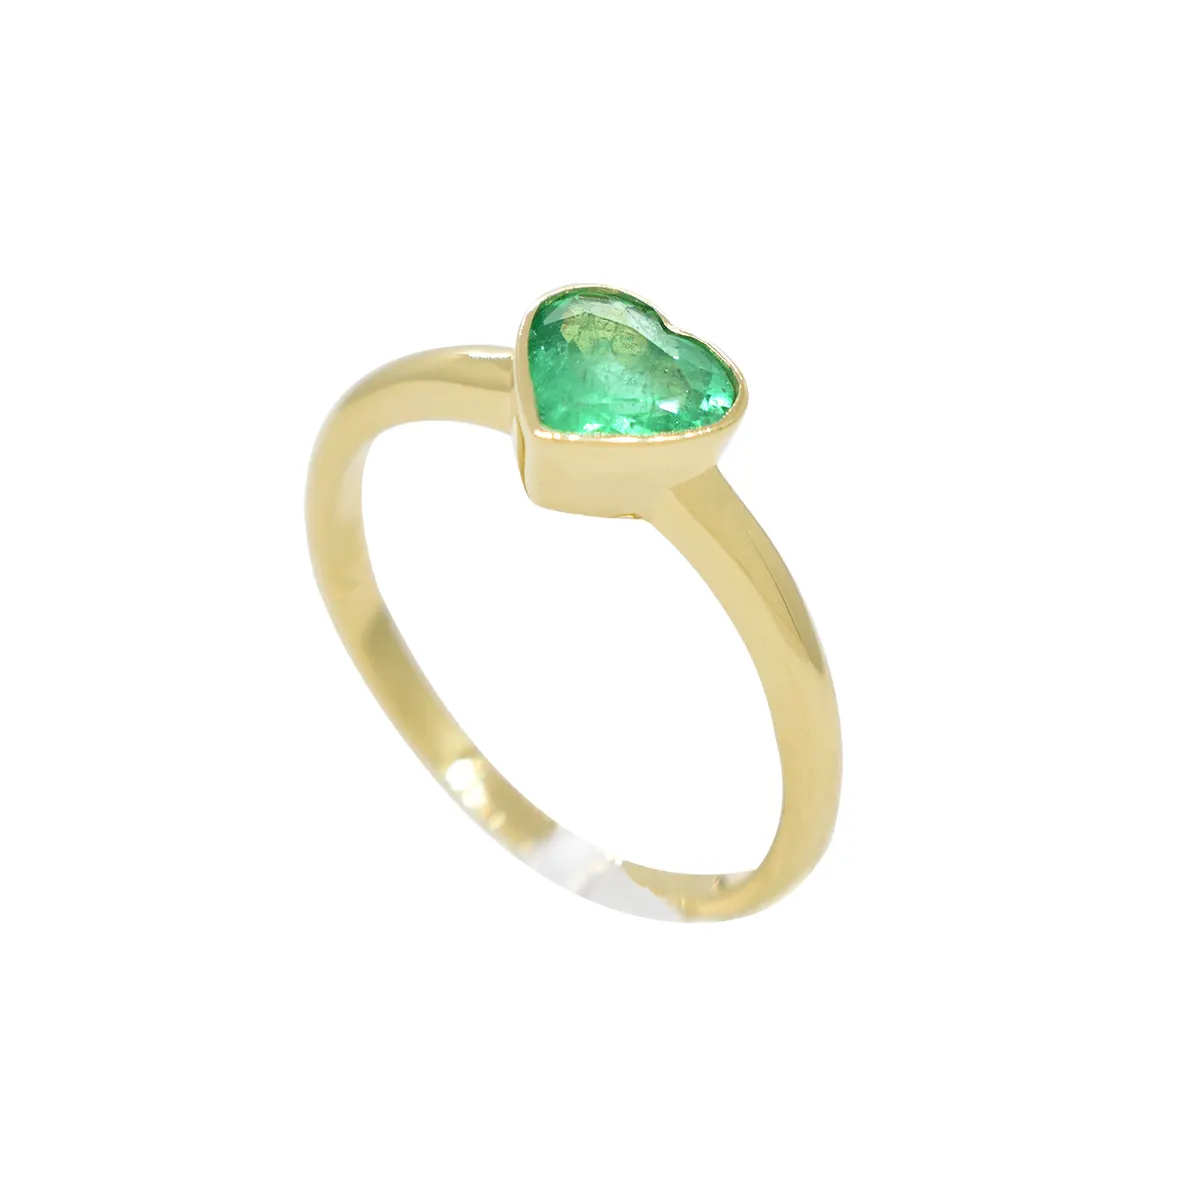 Simple heart-shaped emerald ring in a classic high polish bezel setting, which creates fantastic protection for this gemstone and makes this ring easy to wear